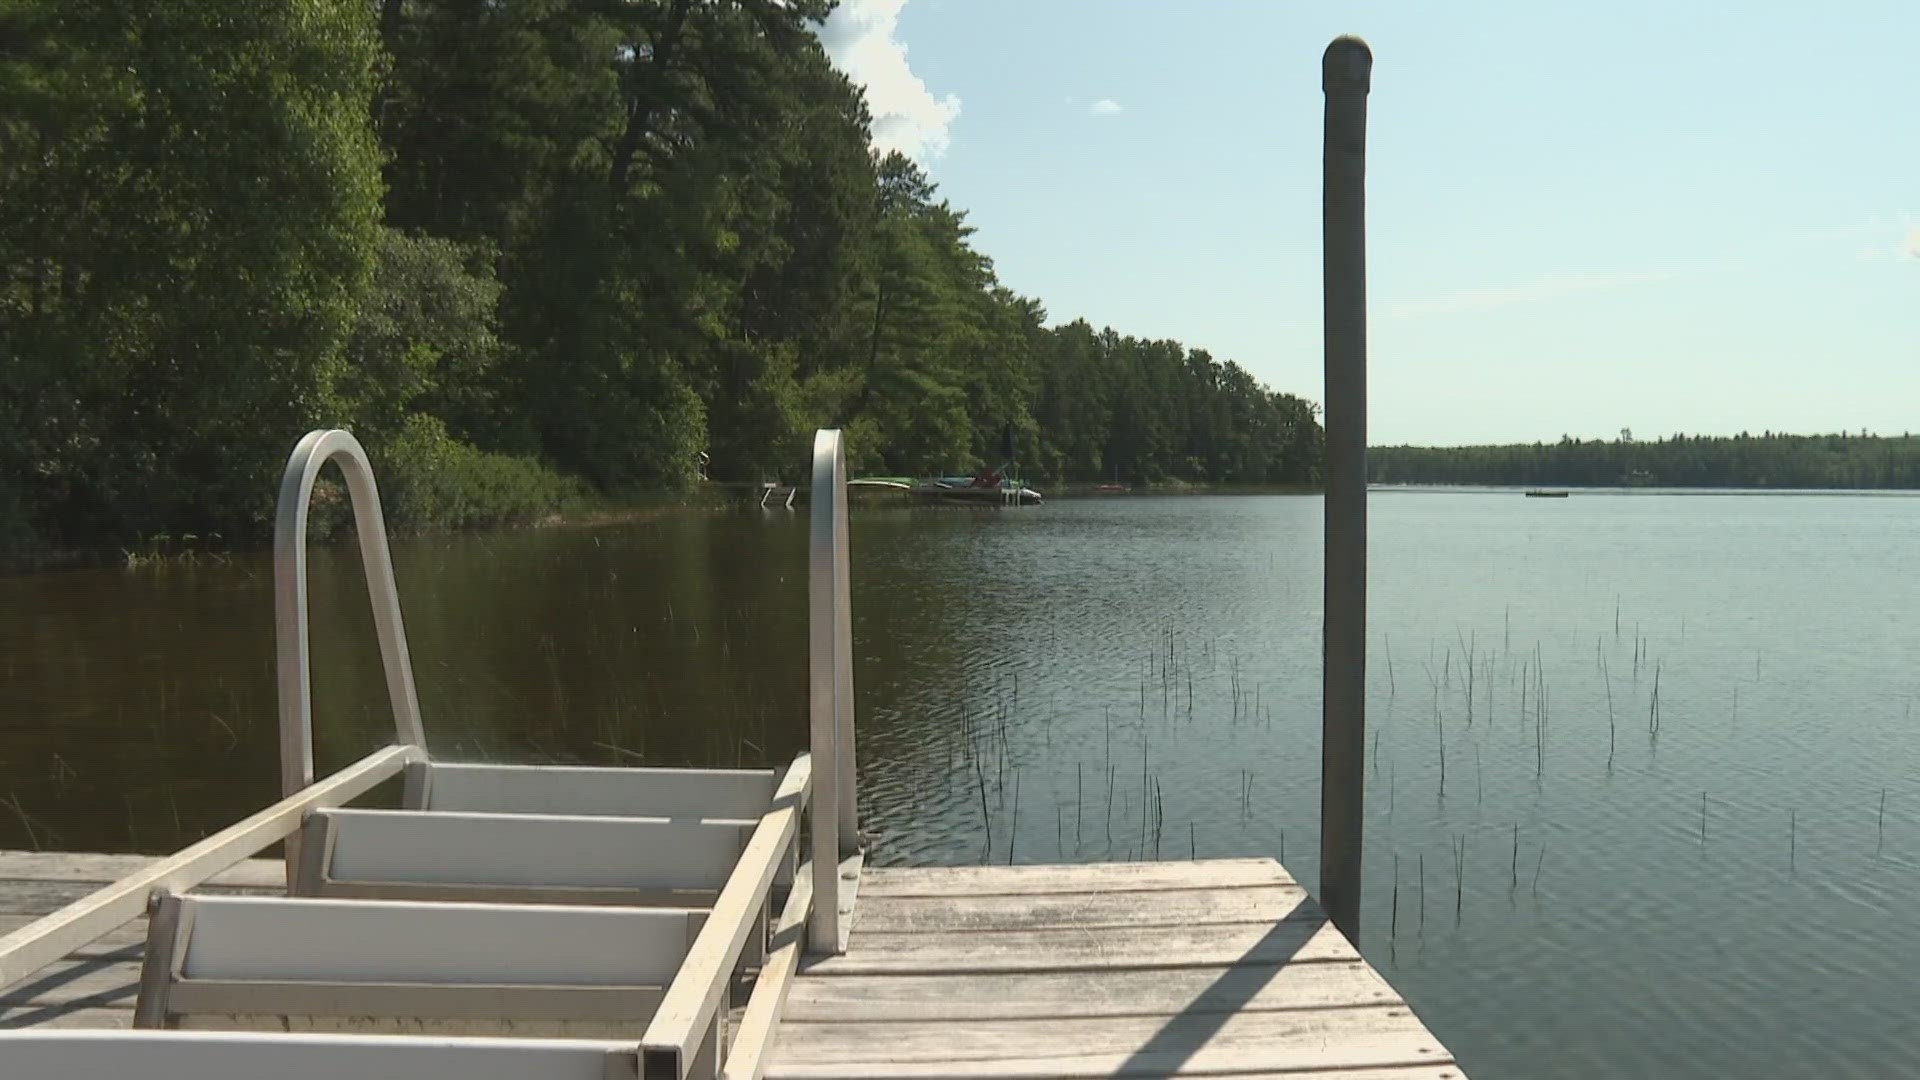 "I wanted to show that I'm a good steward of the land," one LakeSmart award recipient said.